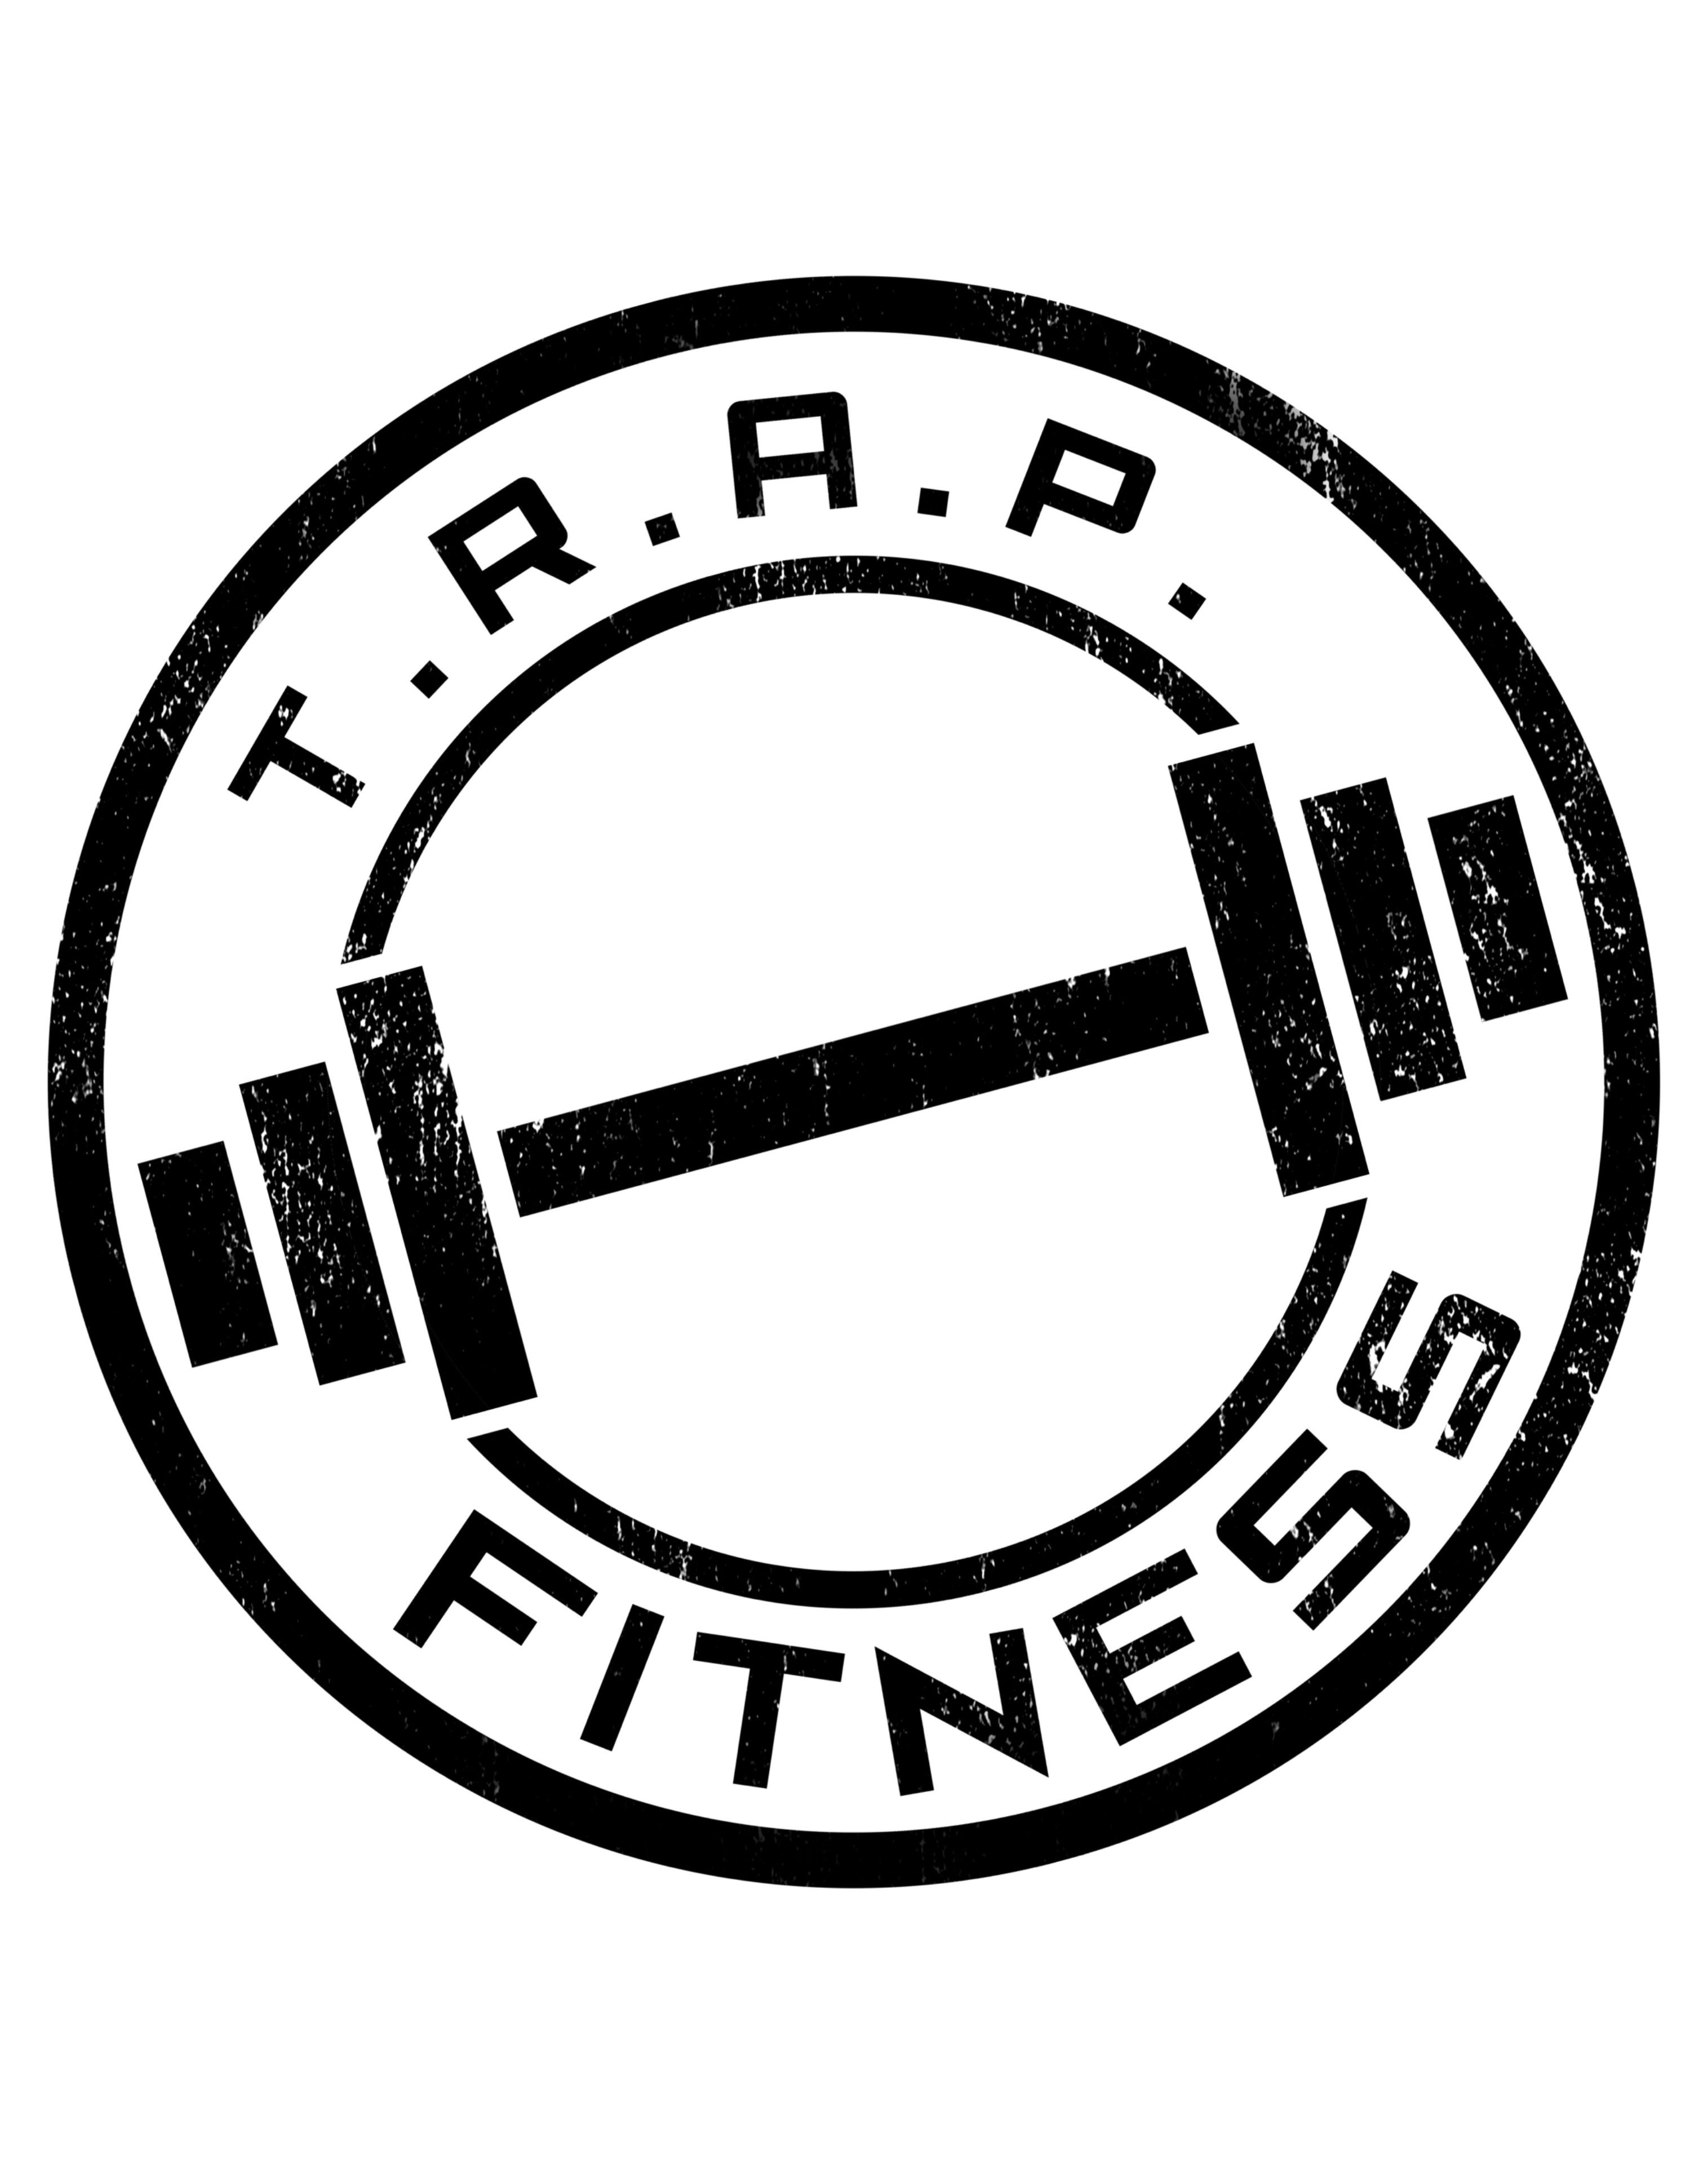 THE TRAP FITNESS